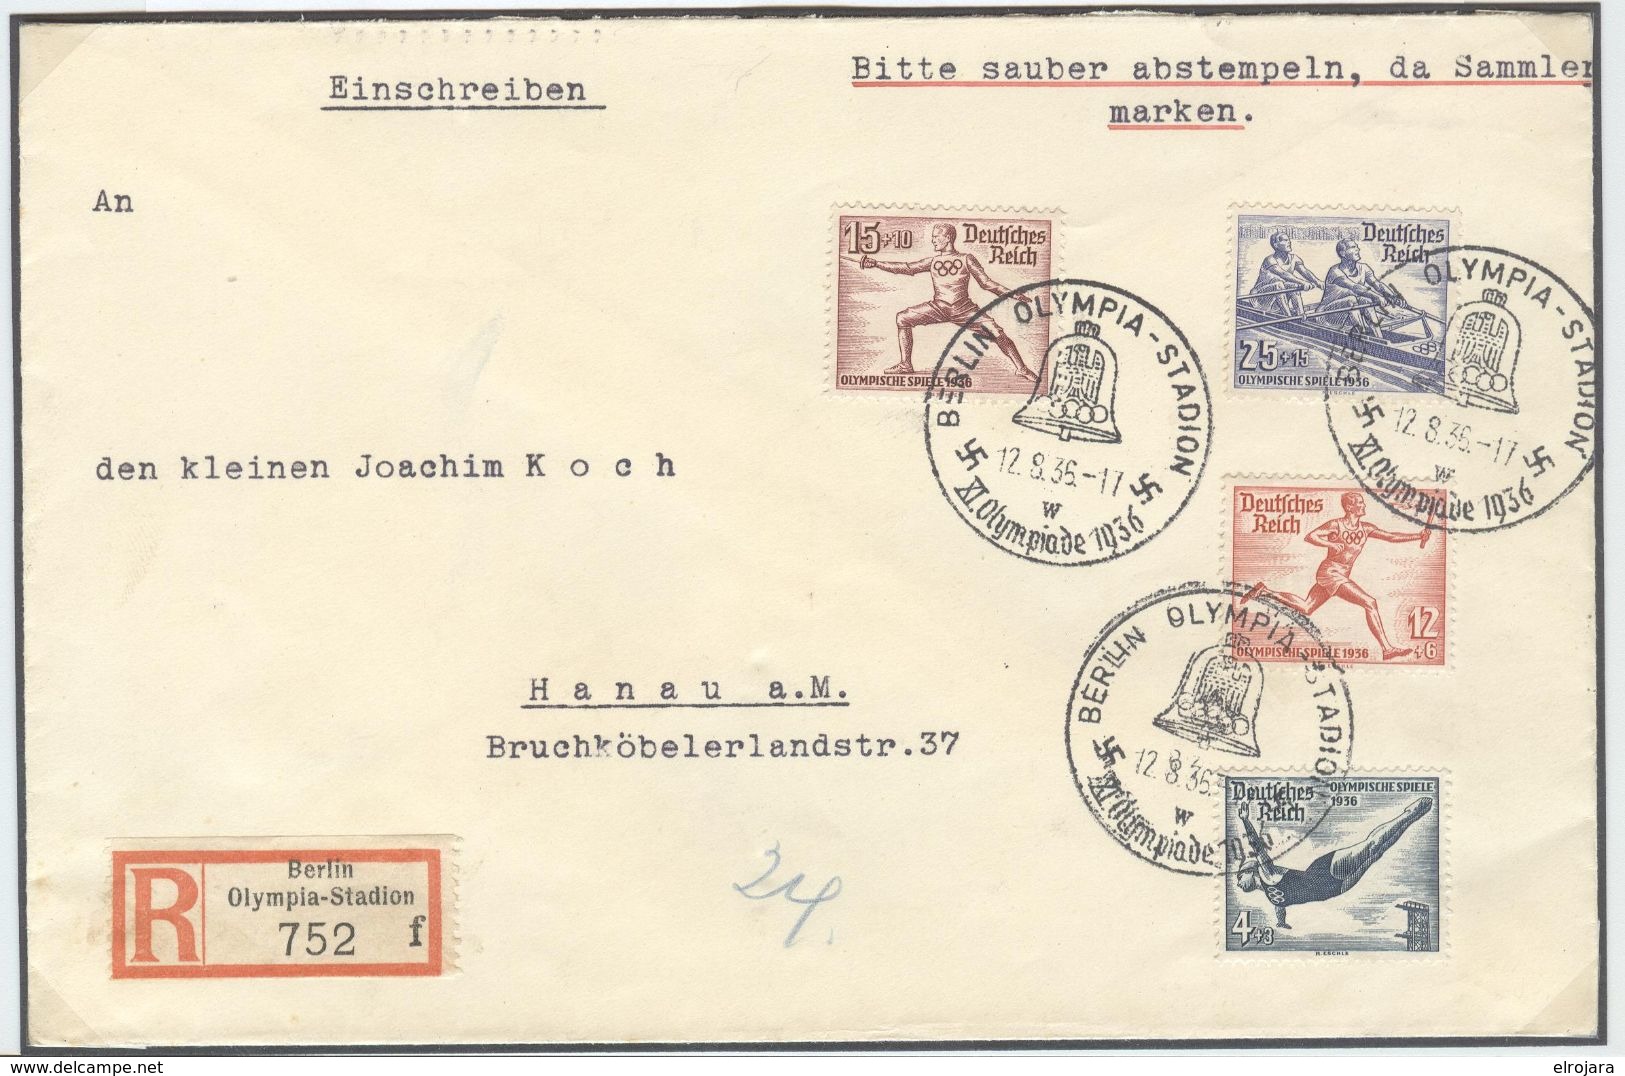 GERMANY Registered Cover With R Label Berlin Olympia Stadion F With Olympic Stamps And Cancel Olympia Stadion - Sommer 1936: Berlin